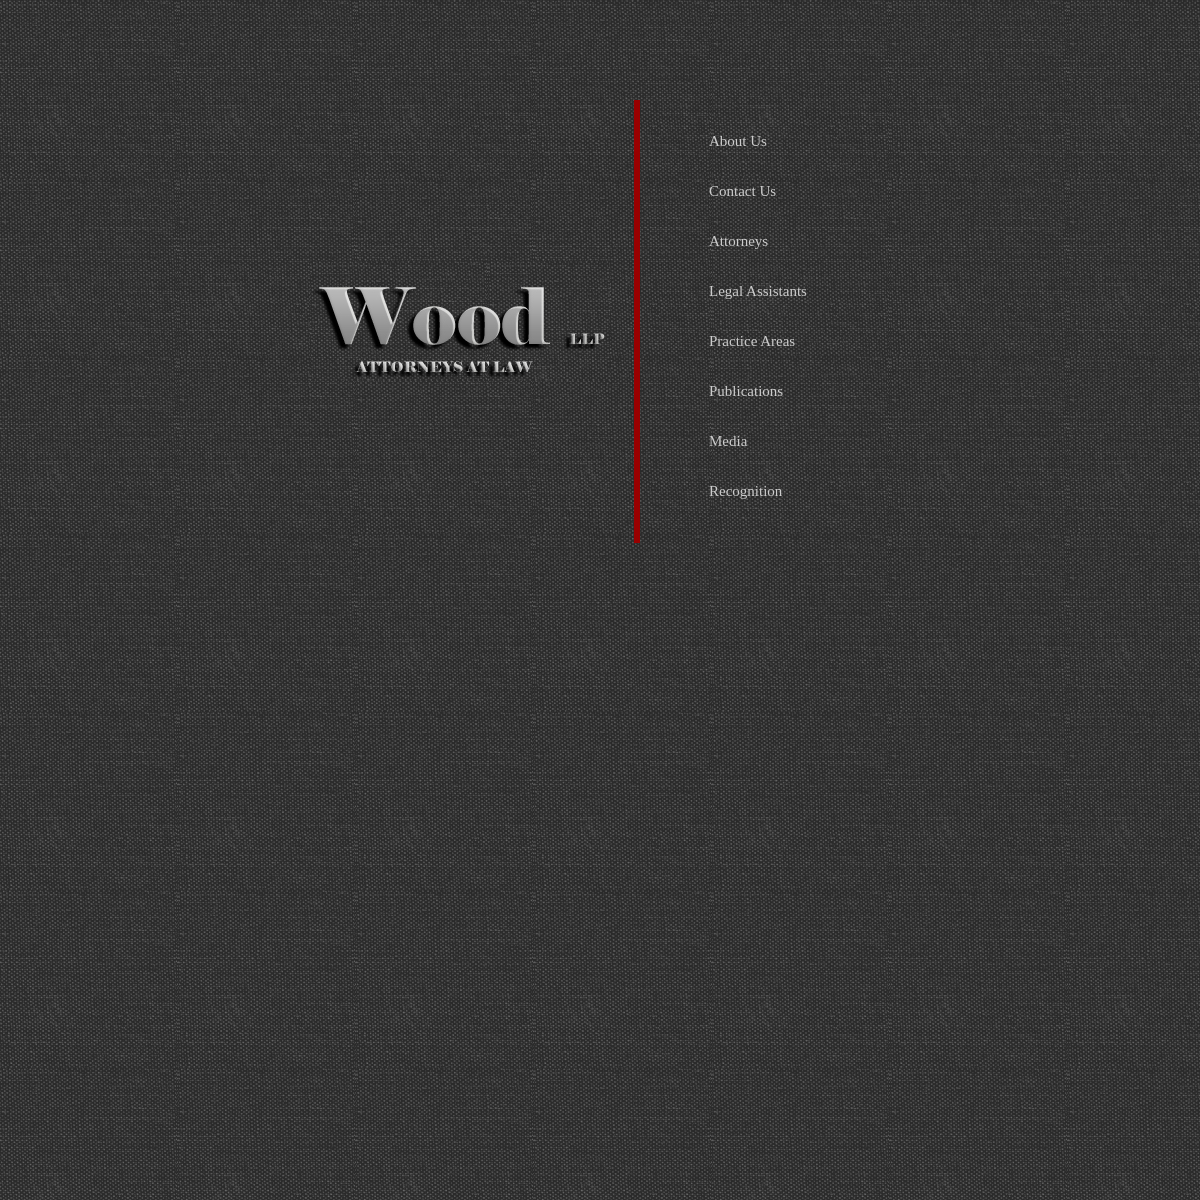 A complete backup of woodllp.com